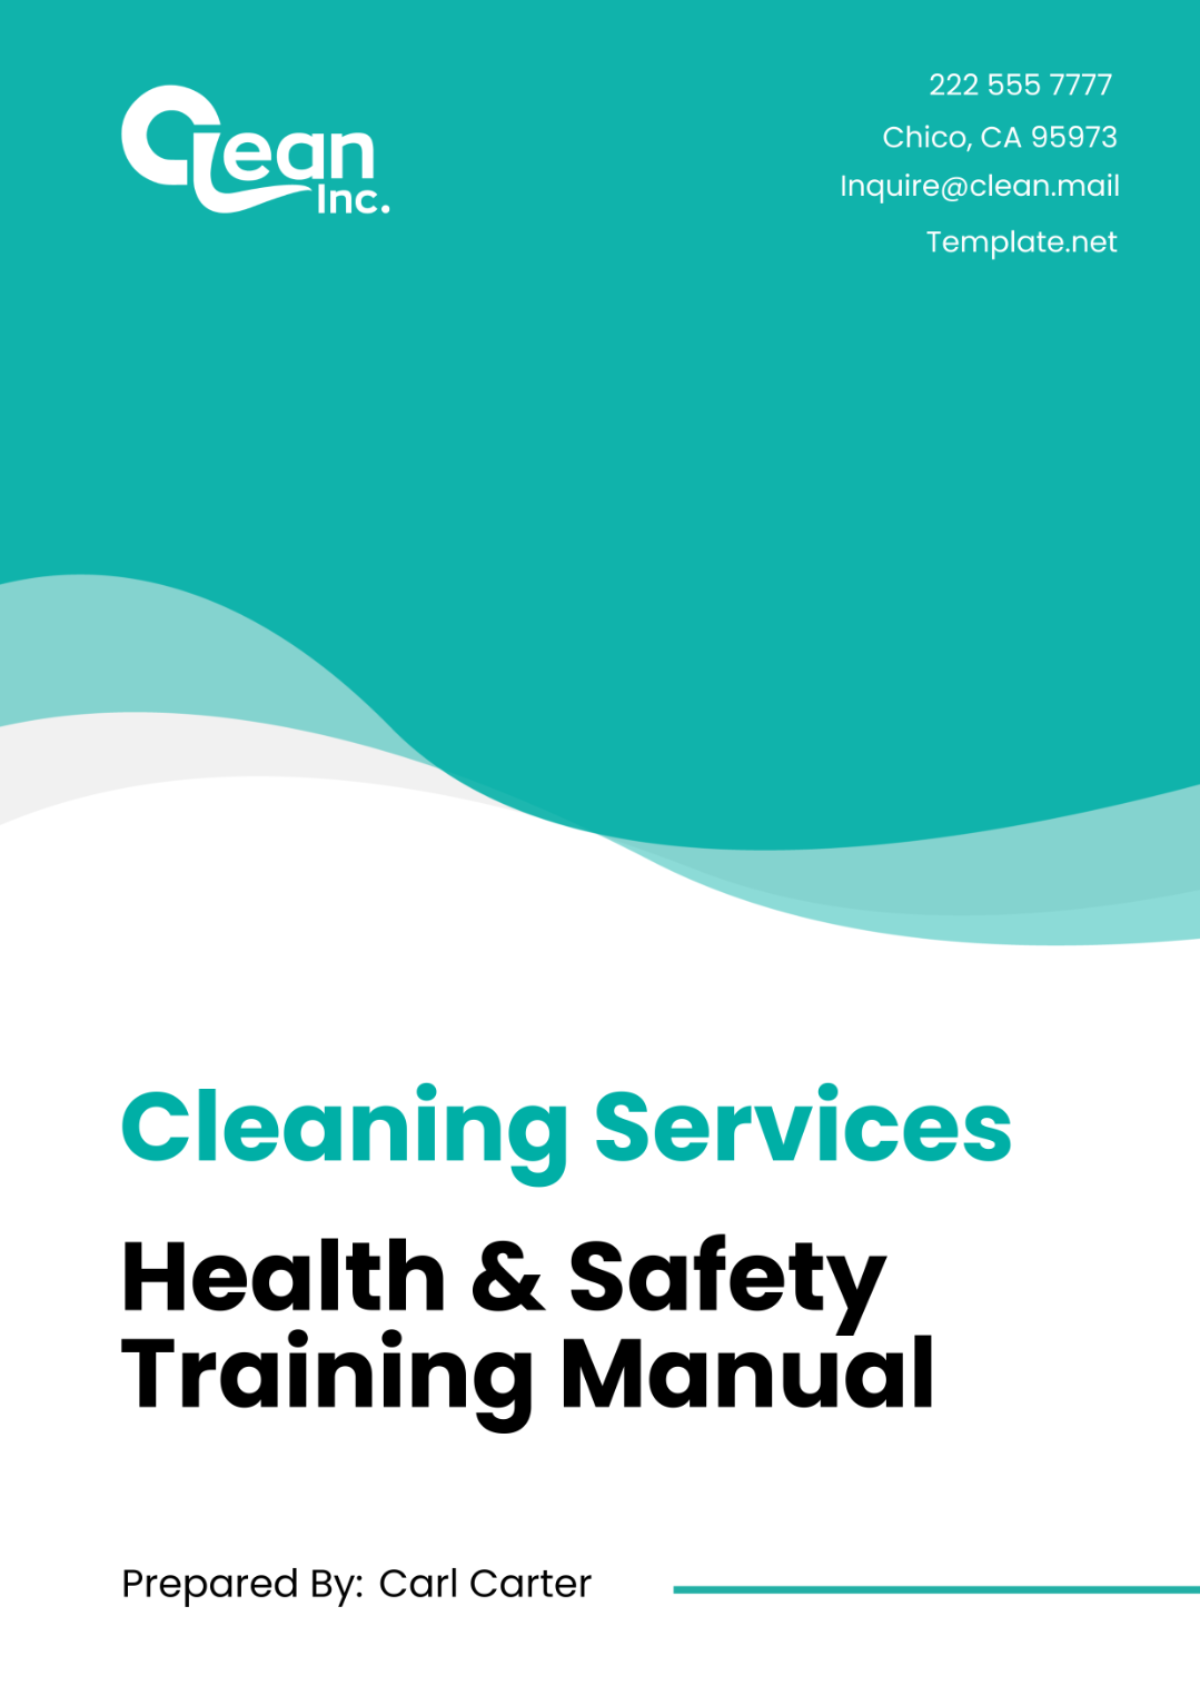 Cleaning Services Health & Safety Training Manual Template